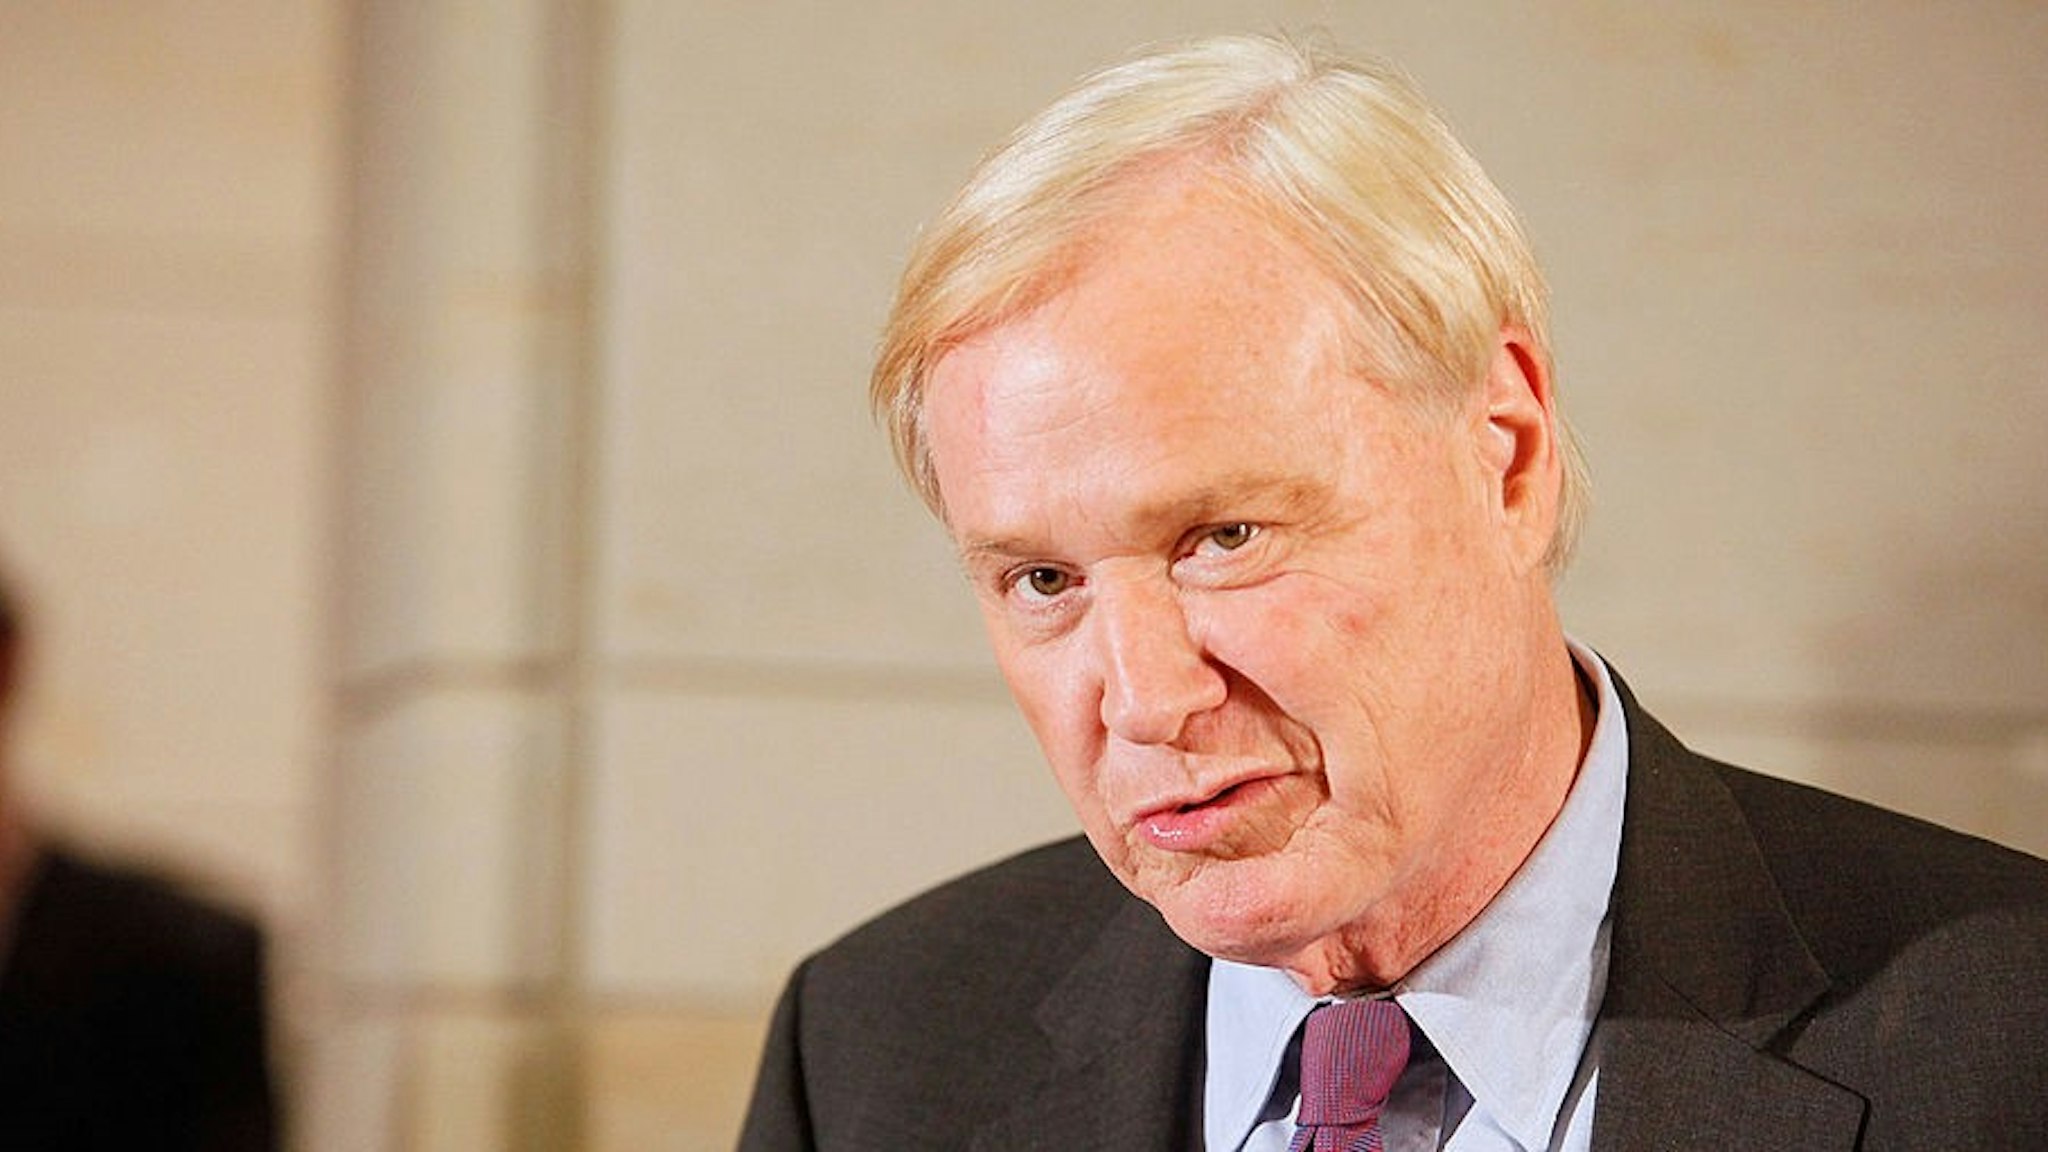 IFAW Board member Chris Matthews attends the International Fund For Animal Welfare's Global Whale Conservation Congressional Reception at the U.S. Capital Visitor Center Atrium on May 19, 2009 in Washington, DC. (Photo by